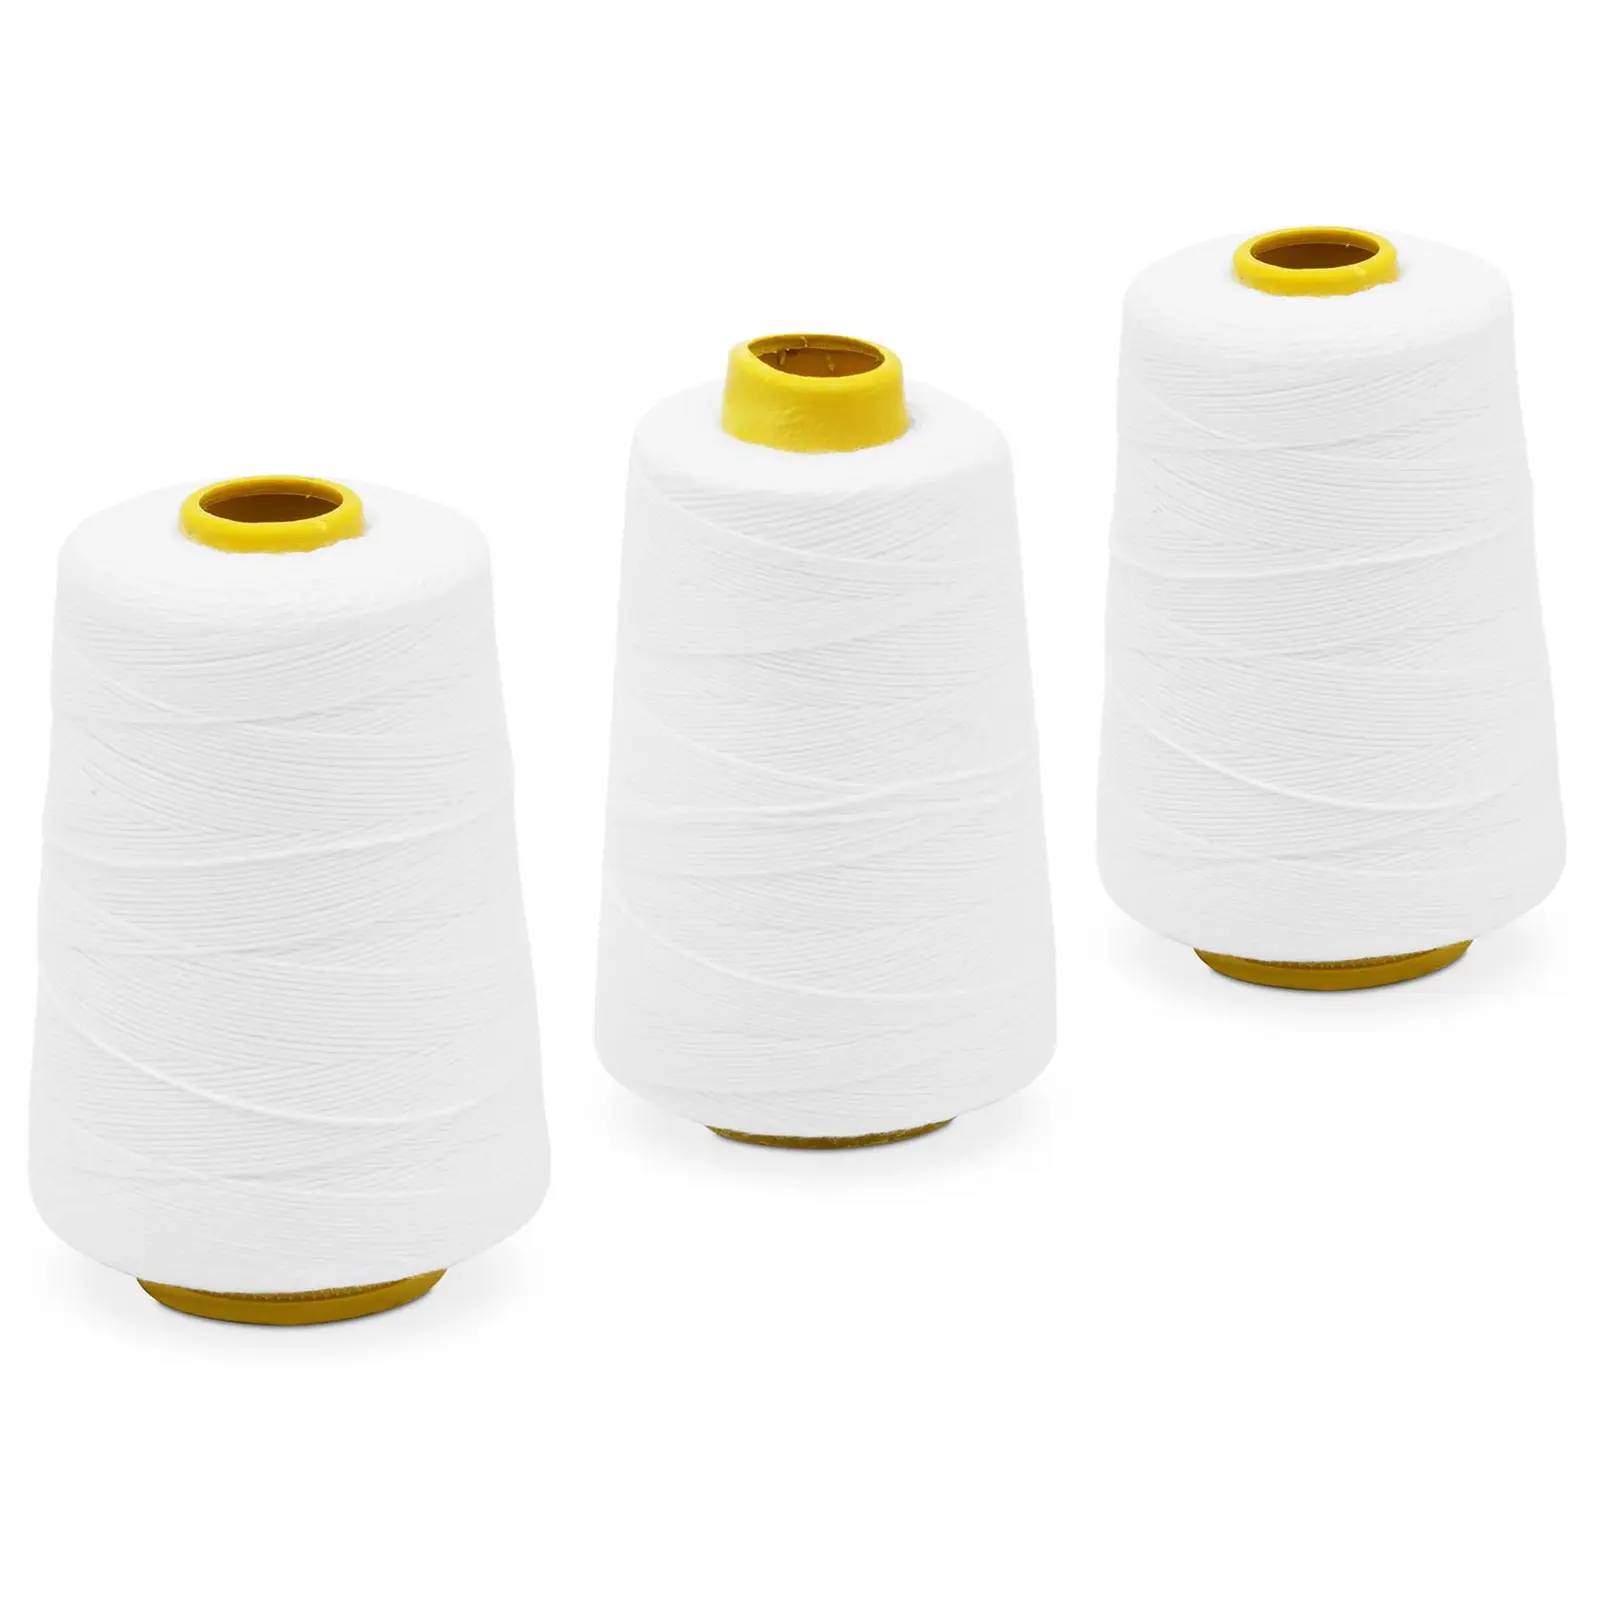 Sausage String - cotton - 120 m - 3 rolls - Royal Catering